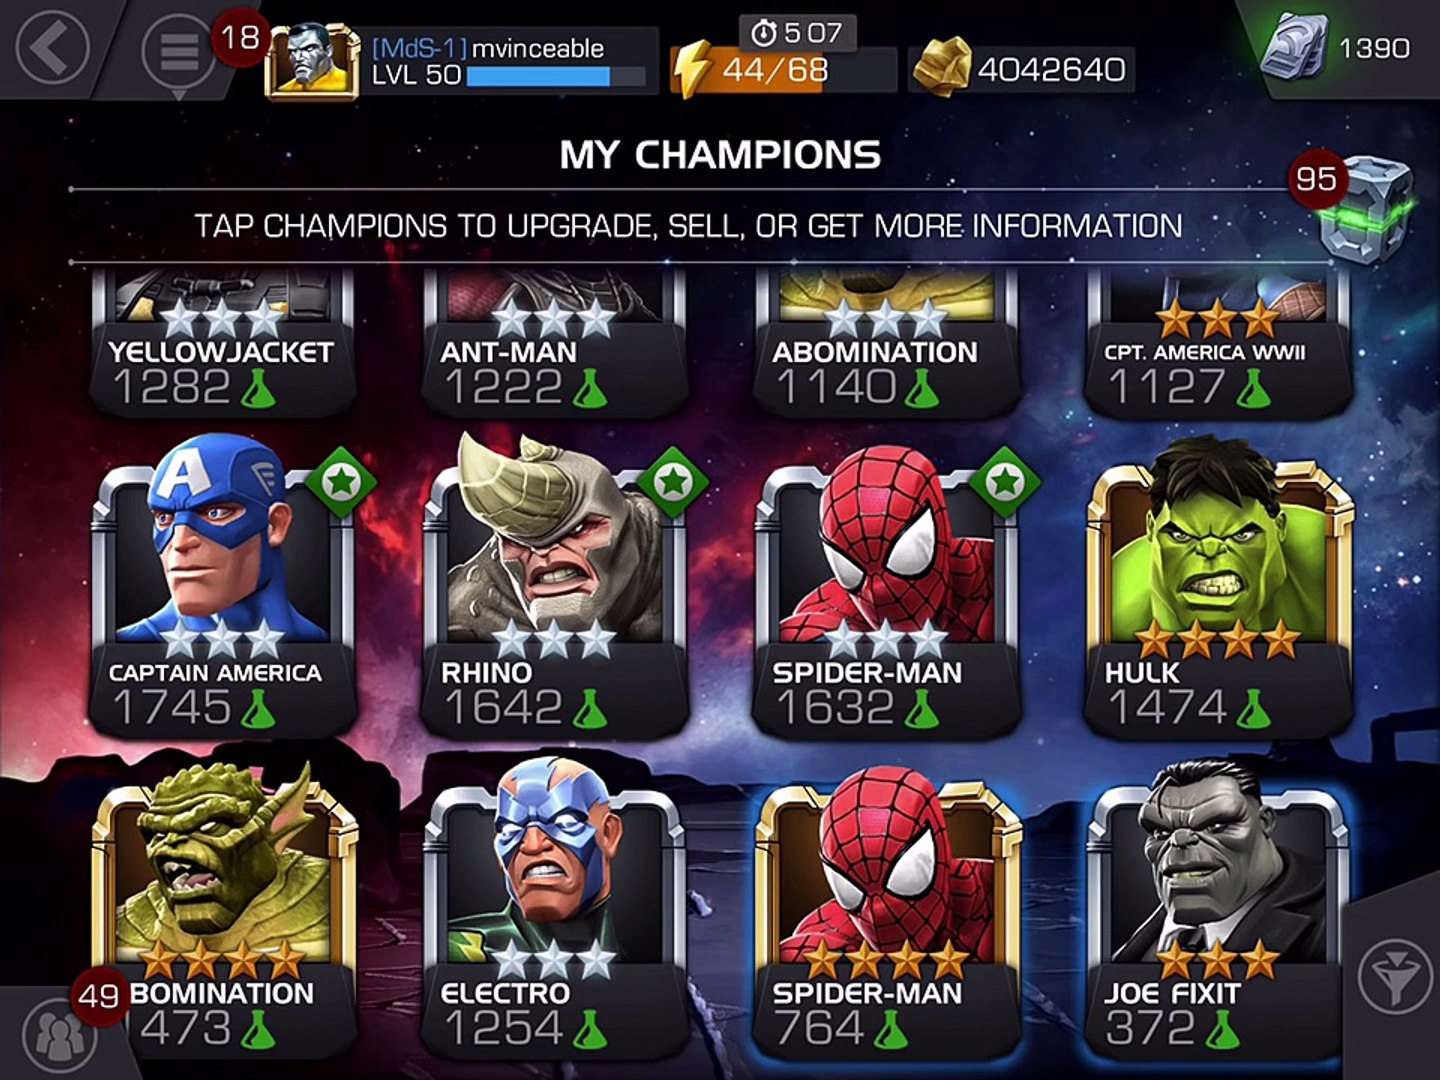 Spider Man And Joe Fixit Unboxing And Battles Vs Hulk And Thor Marvel Contest Of Champions